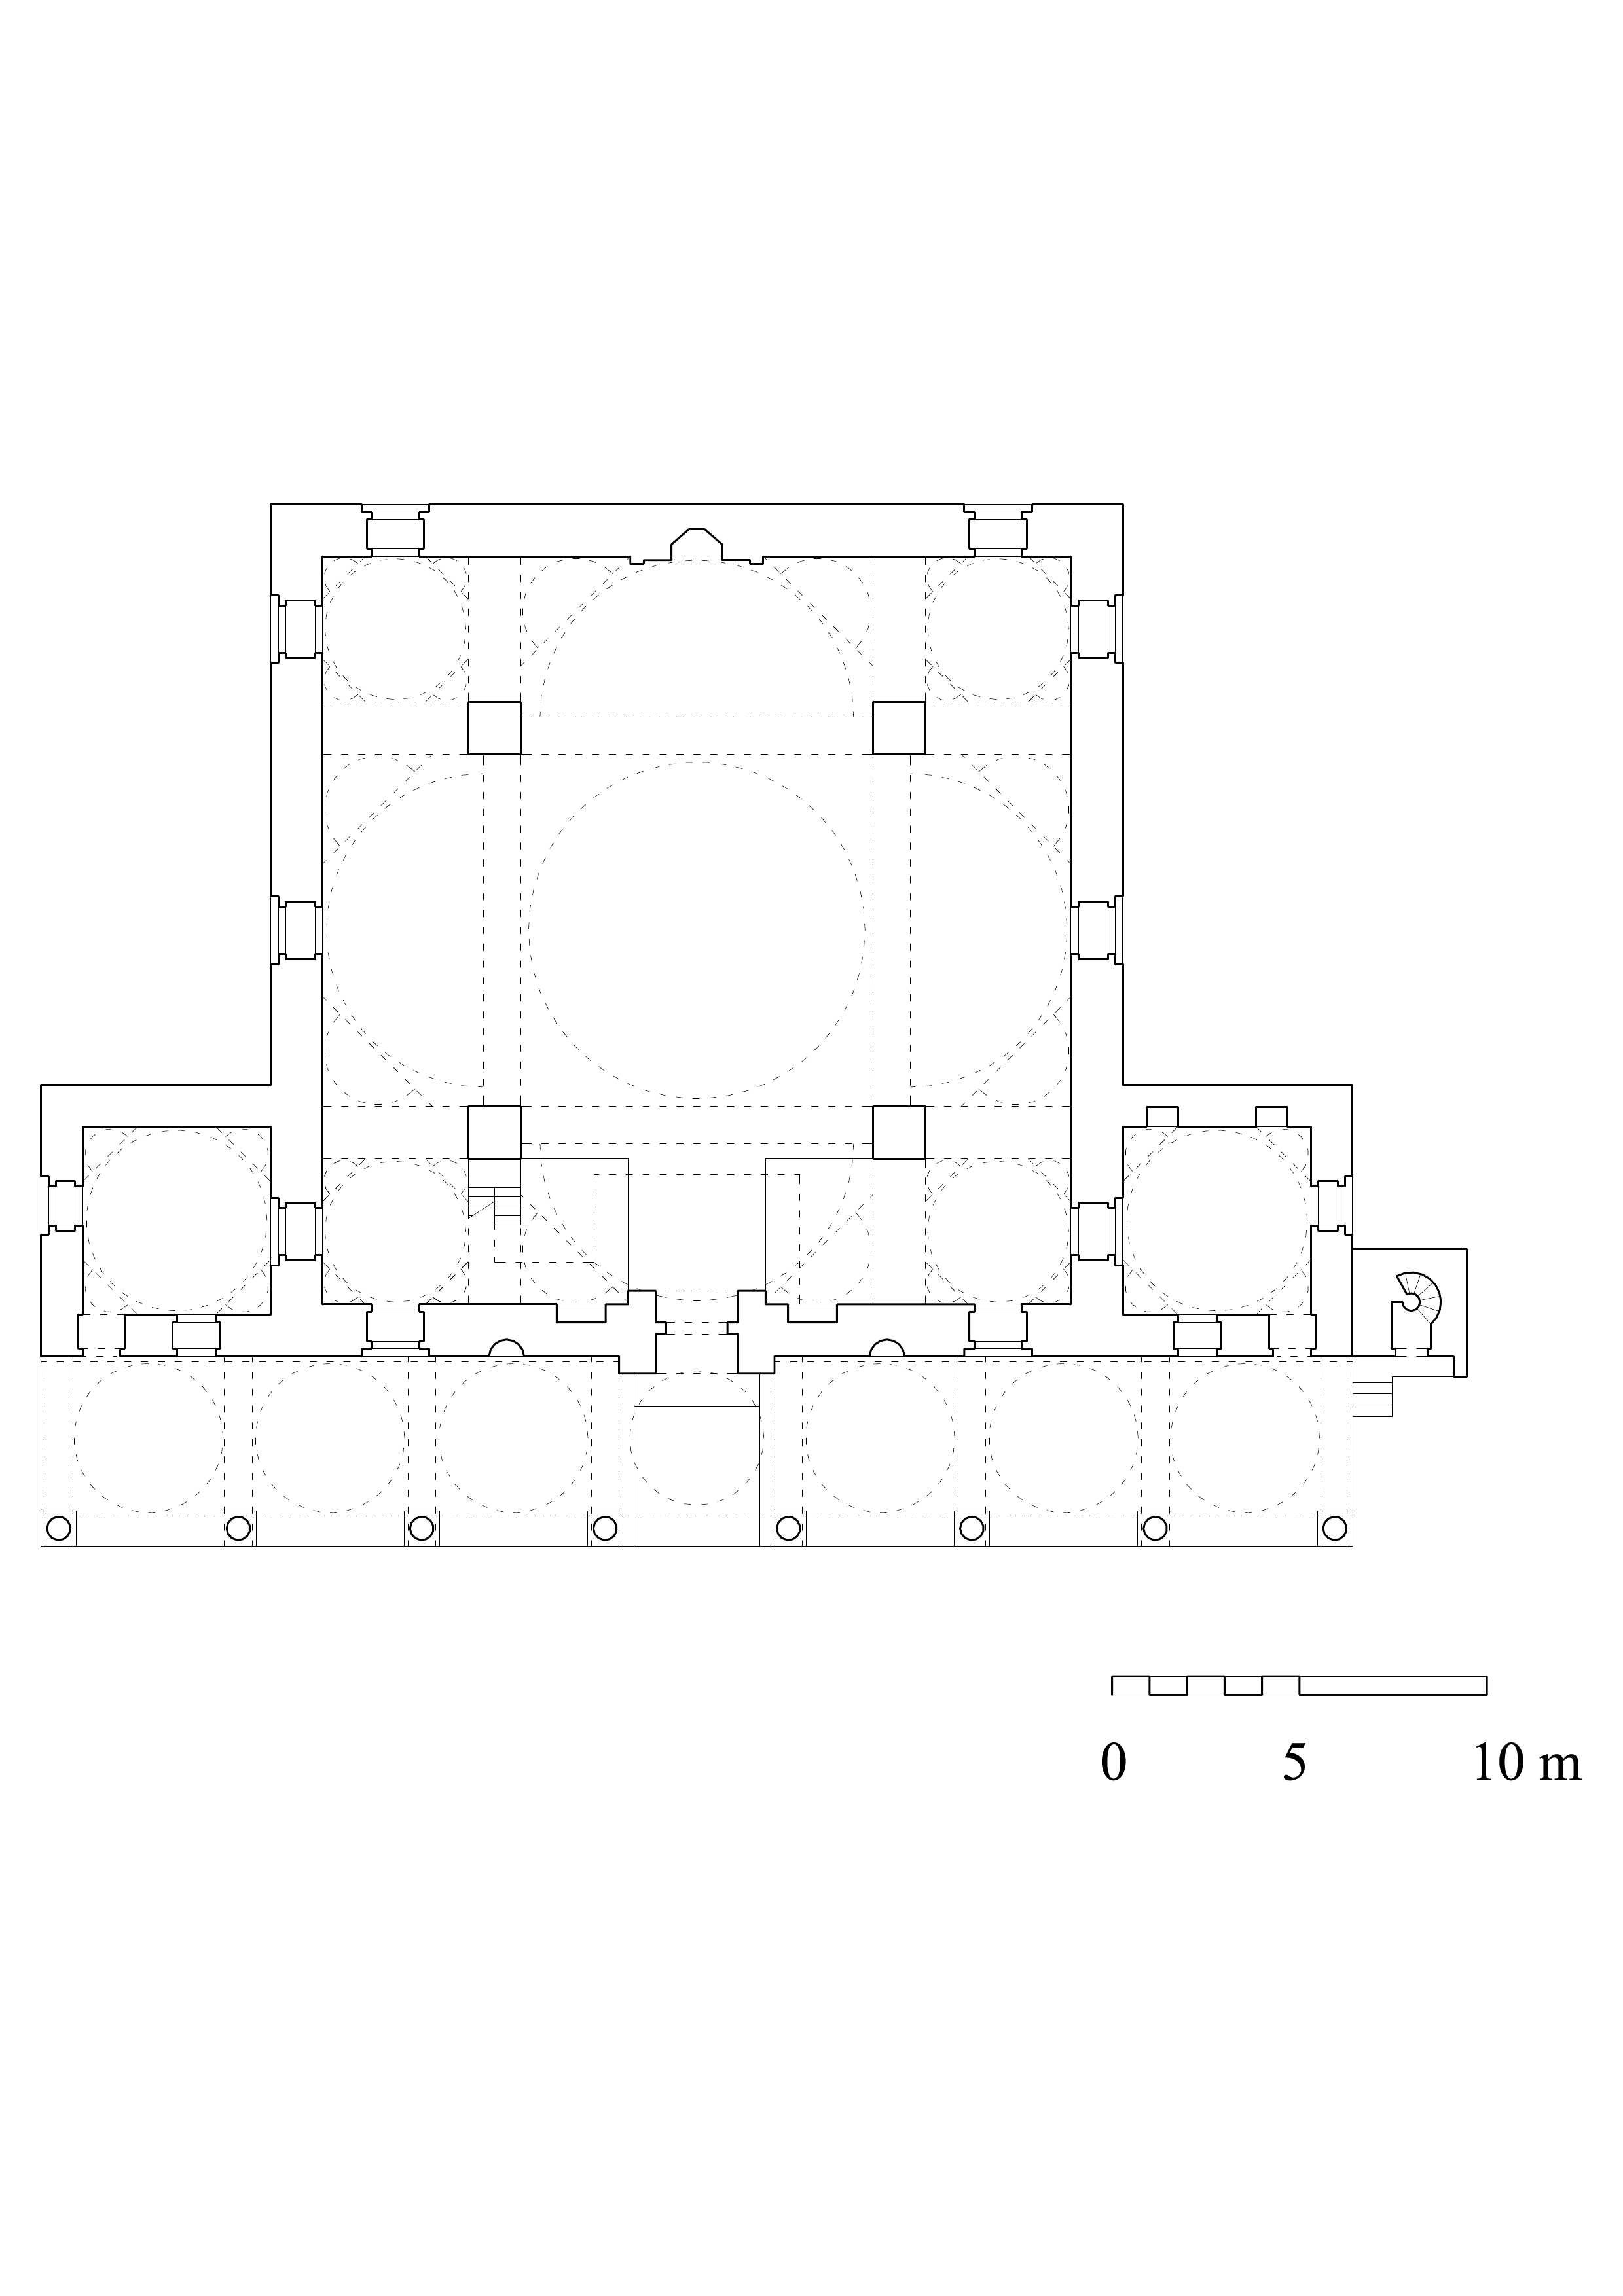 Arben N. Arapi - Floor plan. DWG file in AutoCAD 2000 format. Click the download button to download a zipped file containing the .dwg file.